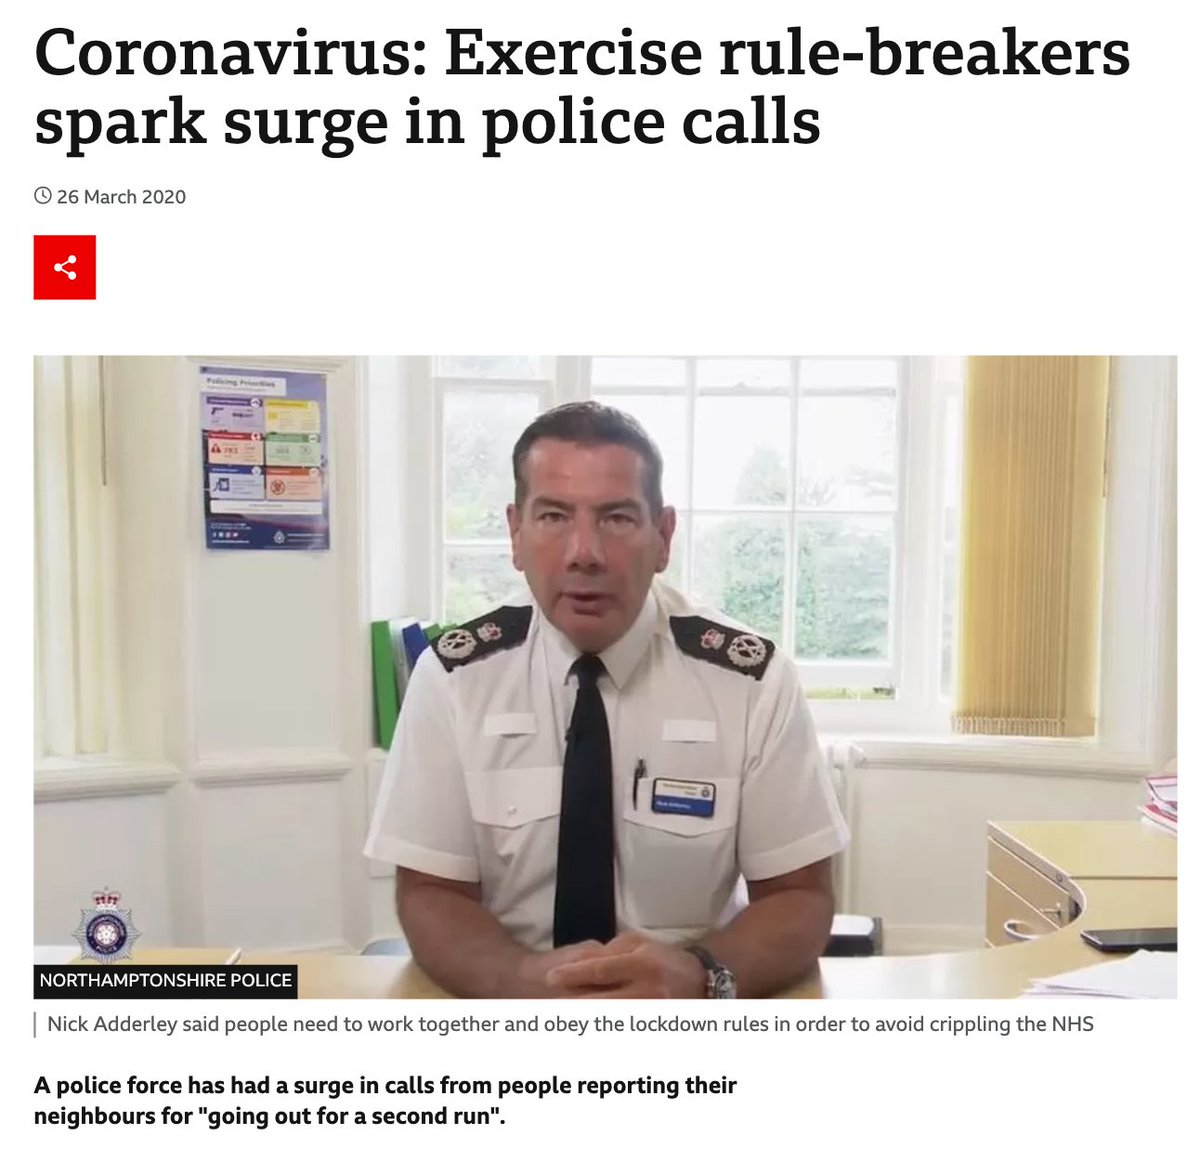 Just four years ago. Important to remember, so that it never happens again. 'A police force has had a surge in calls from people reporting their neighbours for 'going out for a second run'.' Second runs should have been encouraged, not banned.